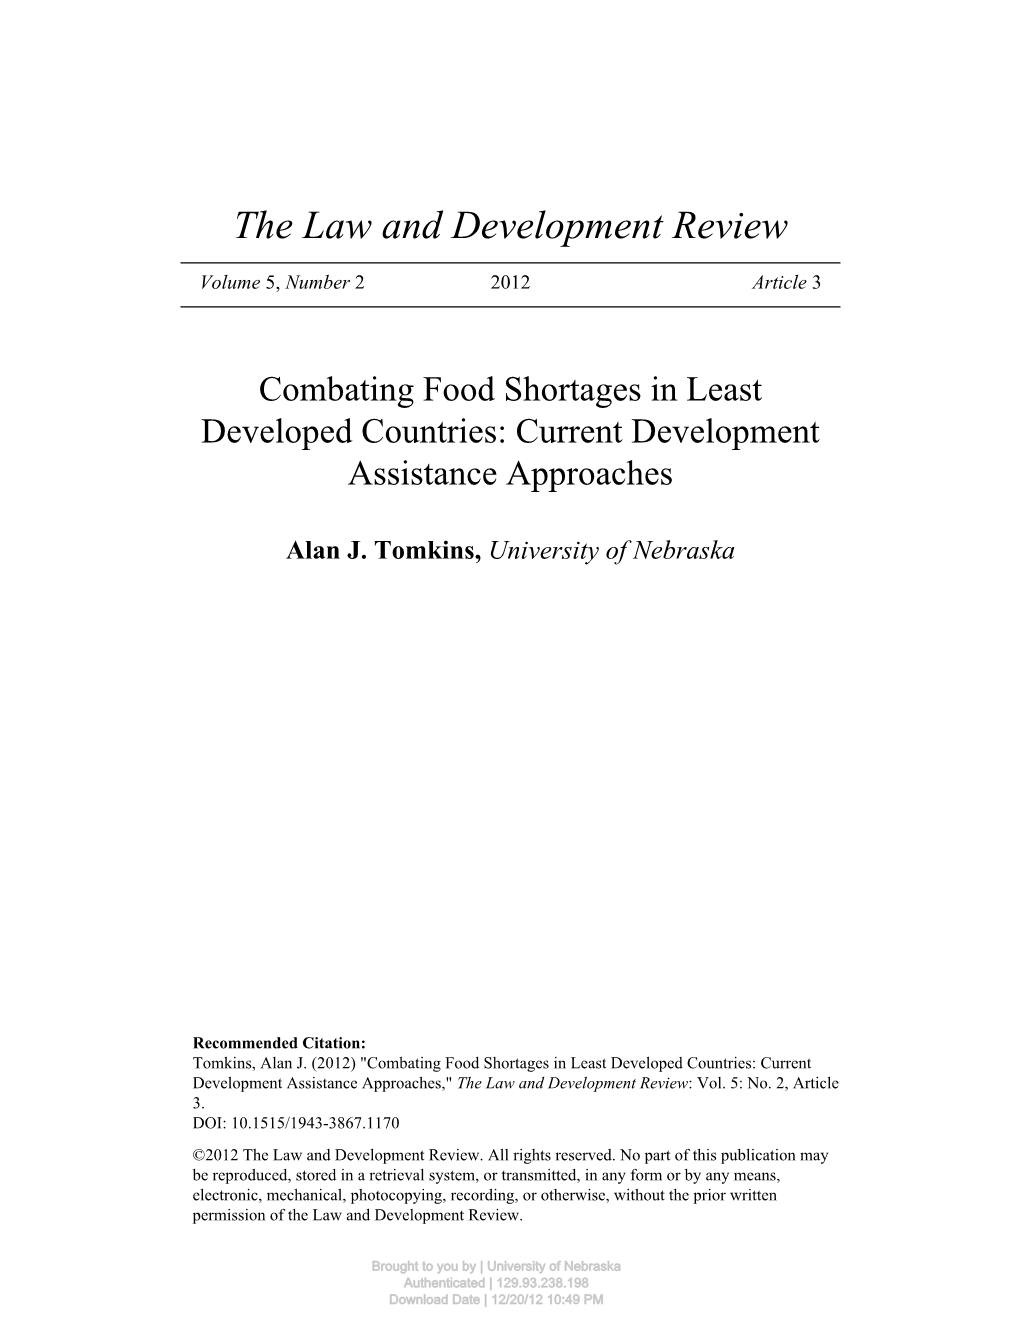 Combating Food Shortages in Least Developed Countries: Current Development Assistance Approaches